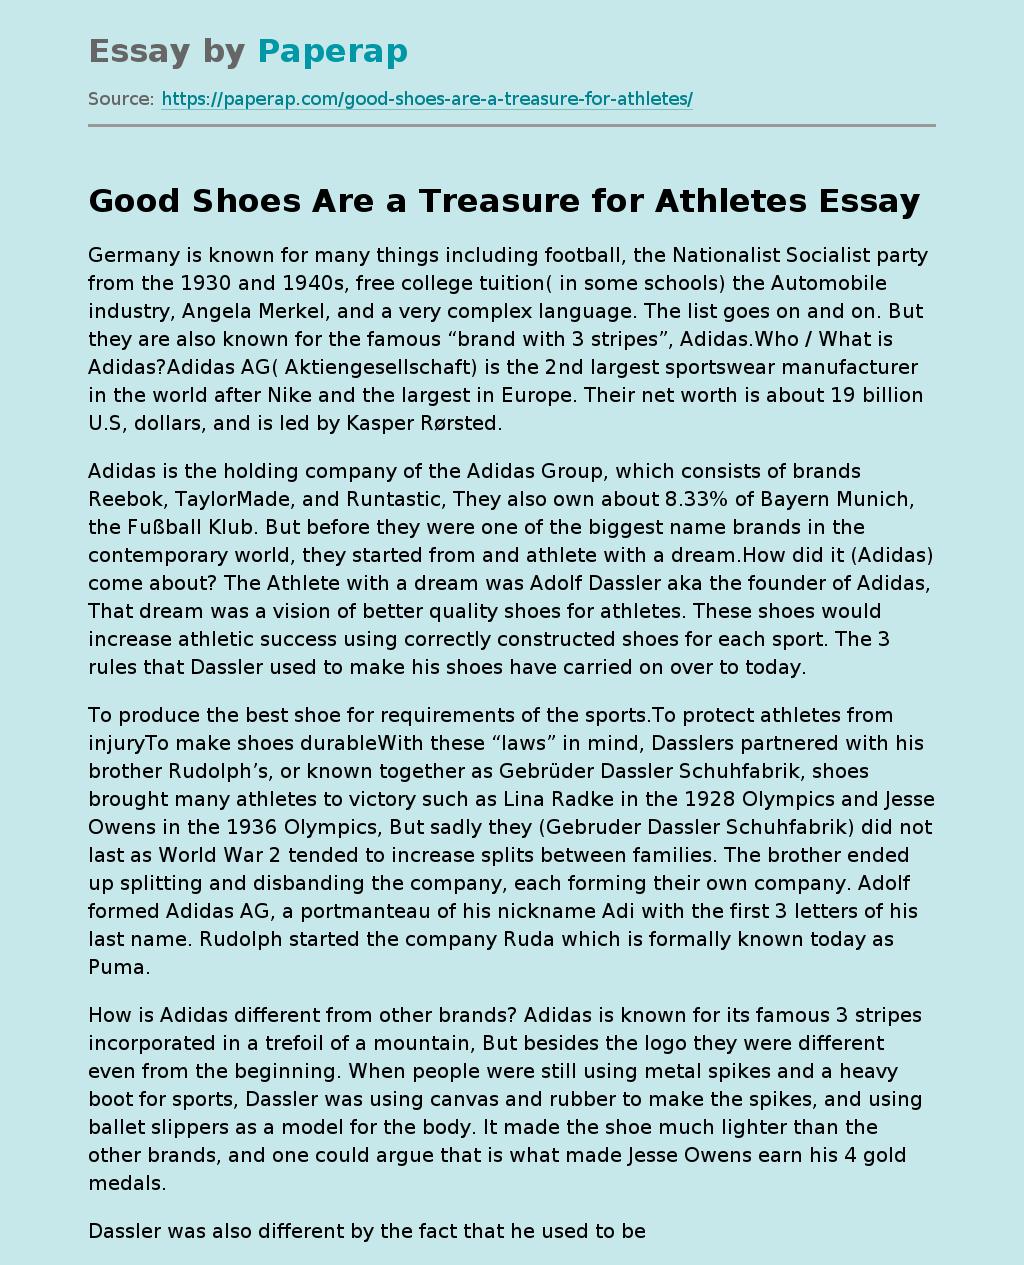 Good Shoes Are a Treasure for Athletes